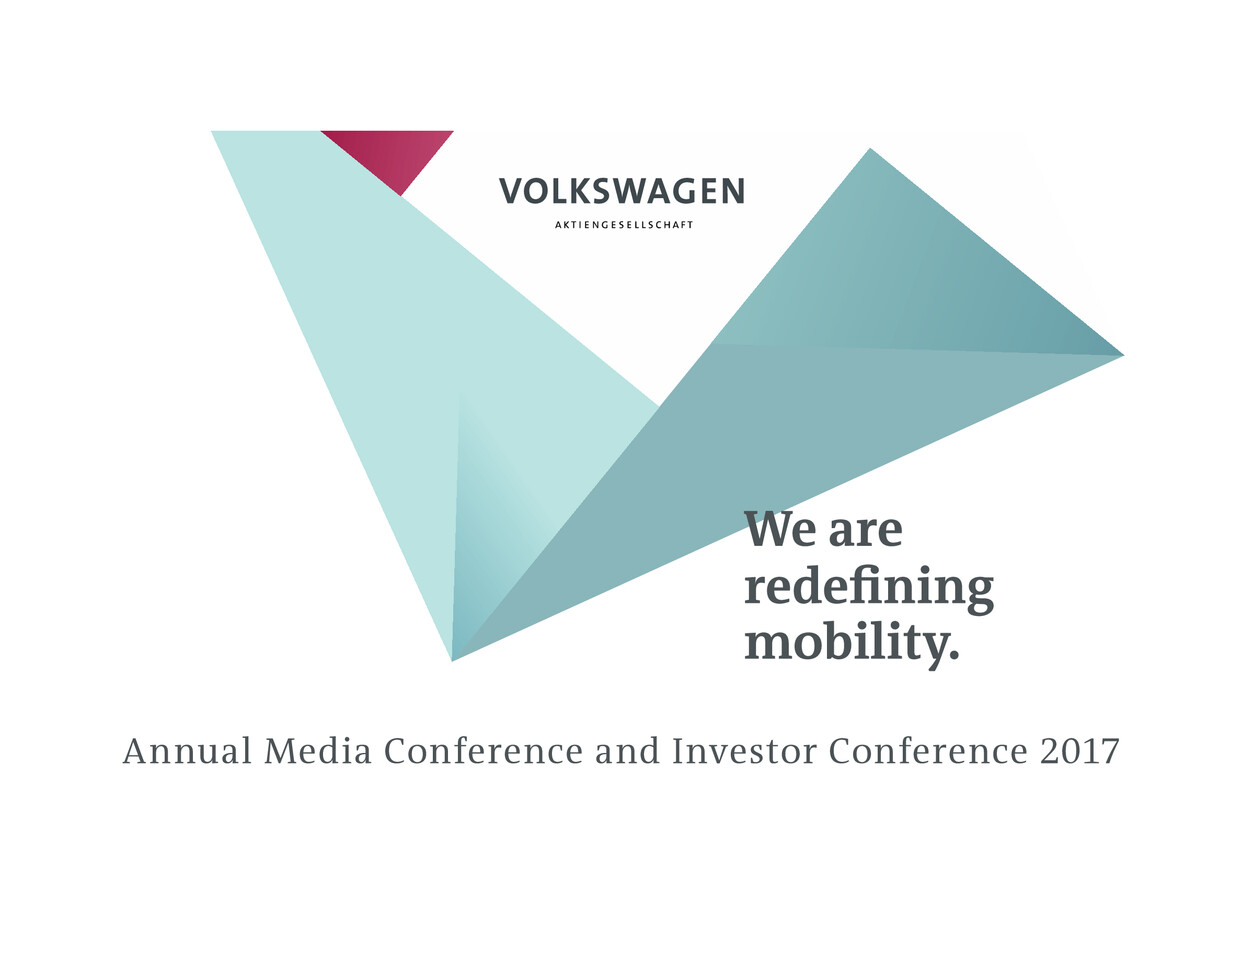 Annual Media Conference & Investor Conference 2017